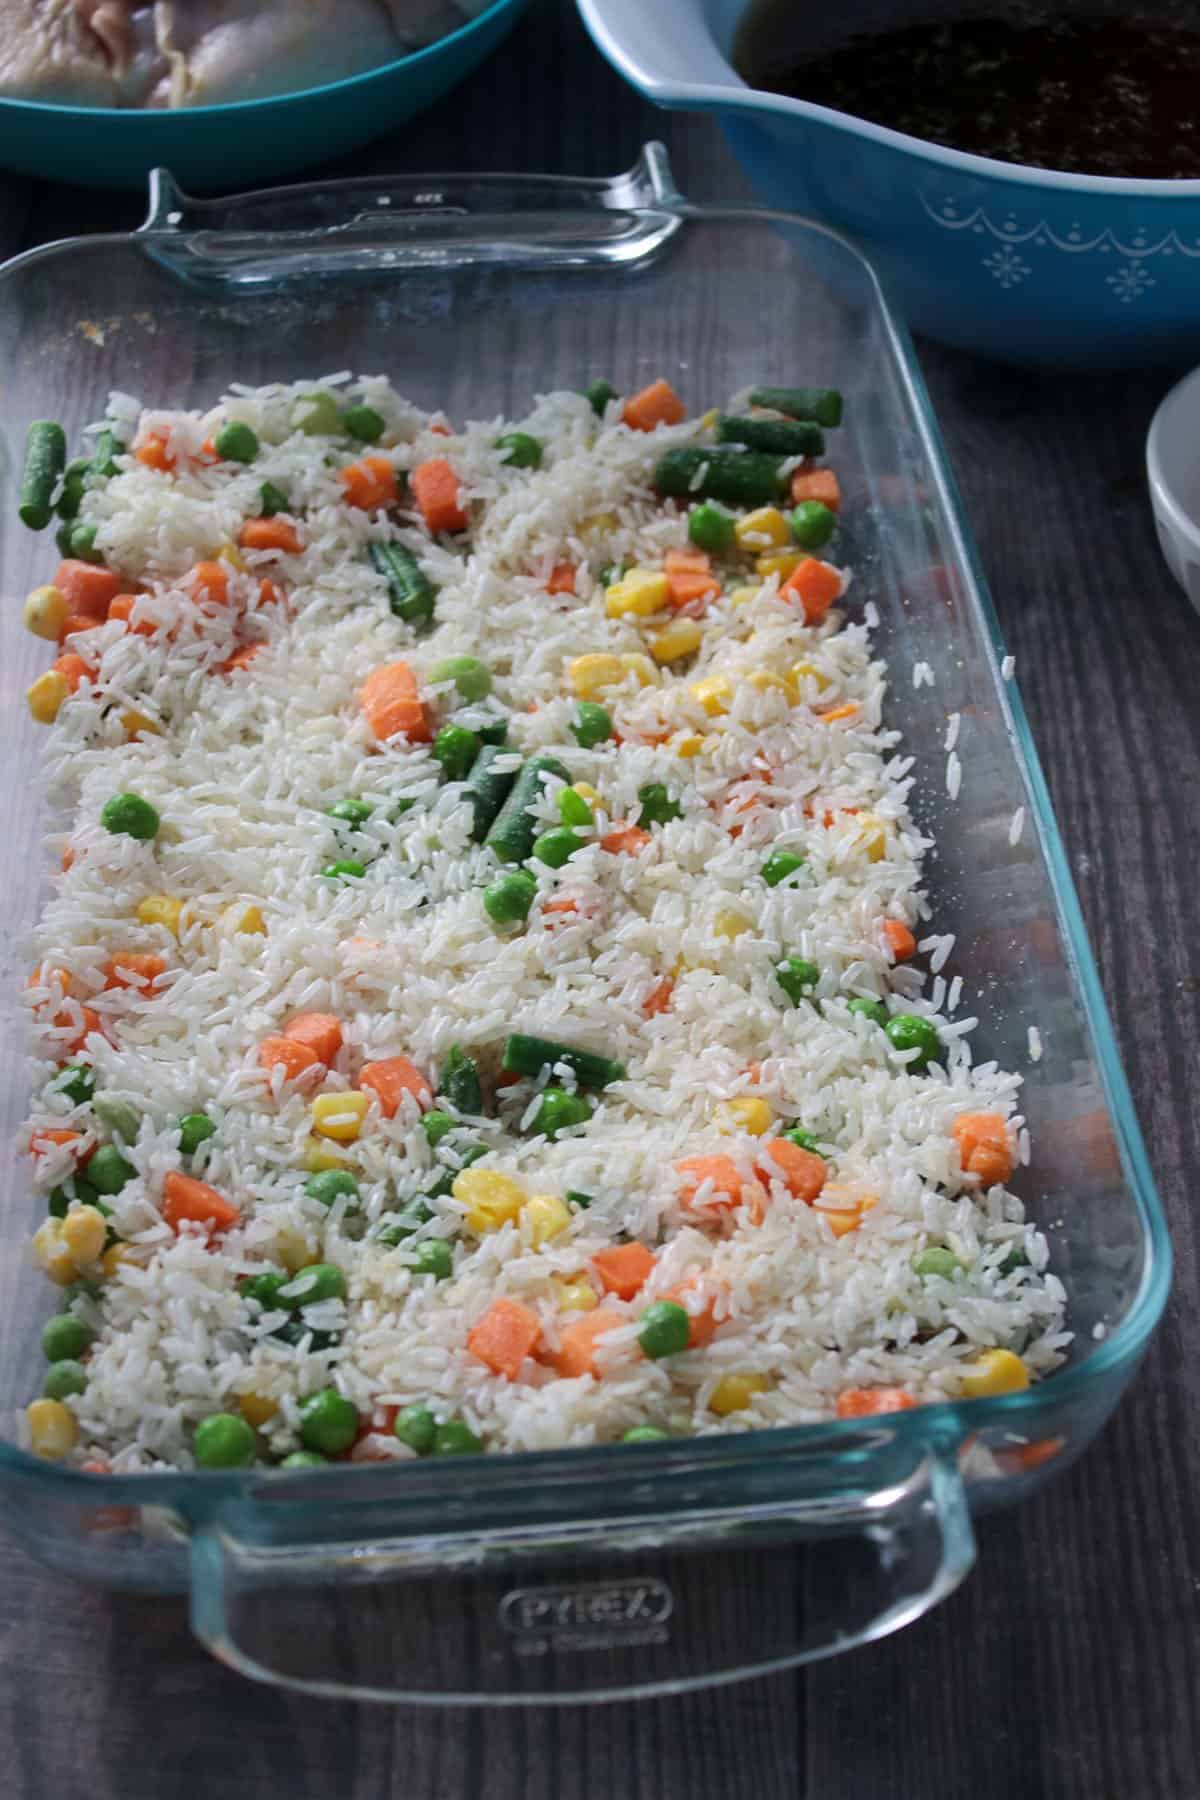 A mixture of rice and mixed veggies on a baking dish.